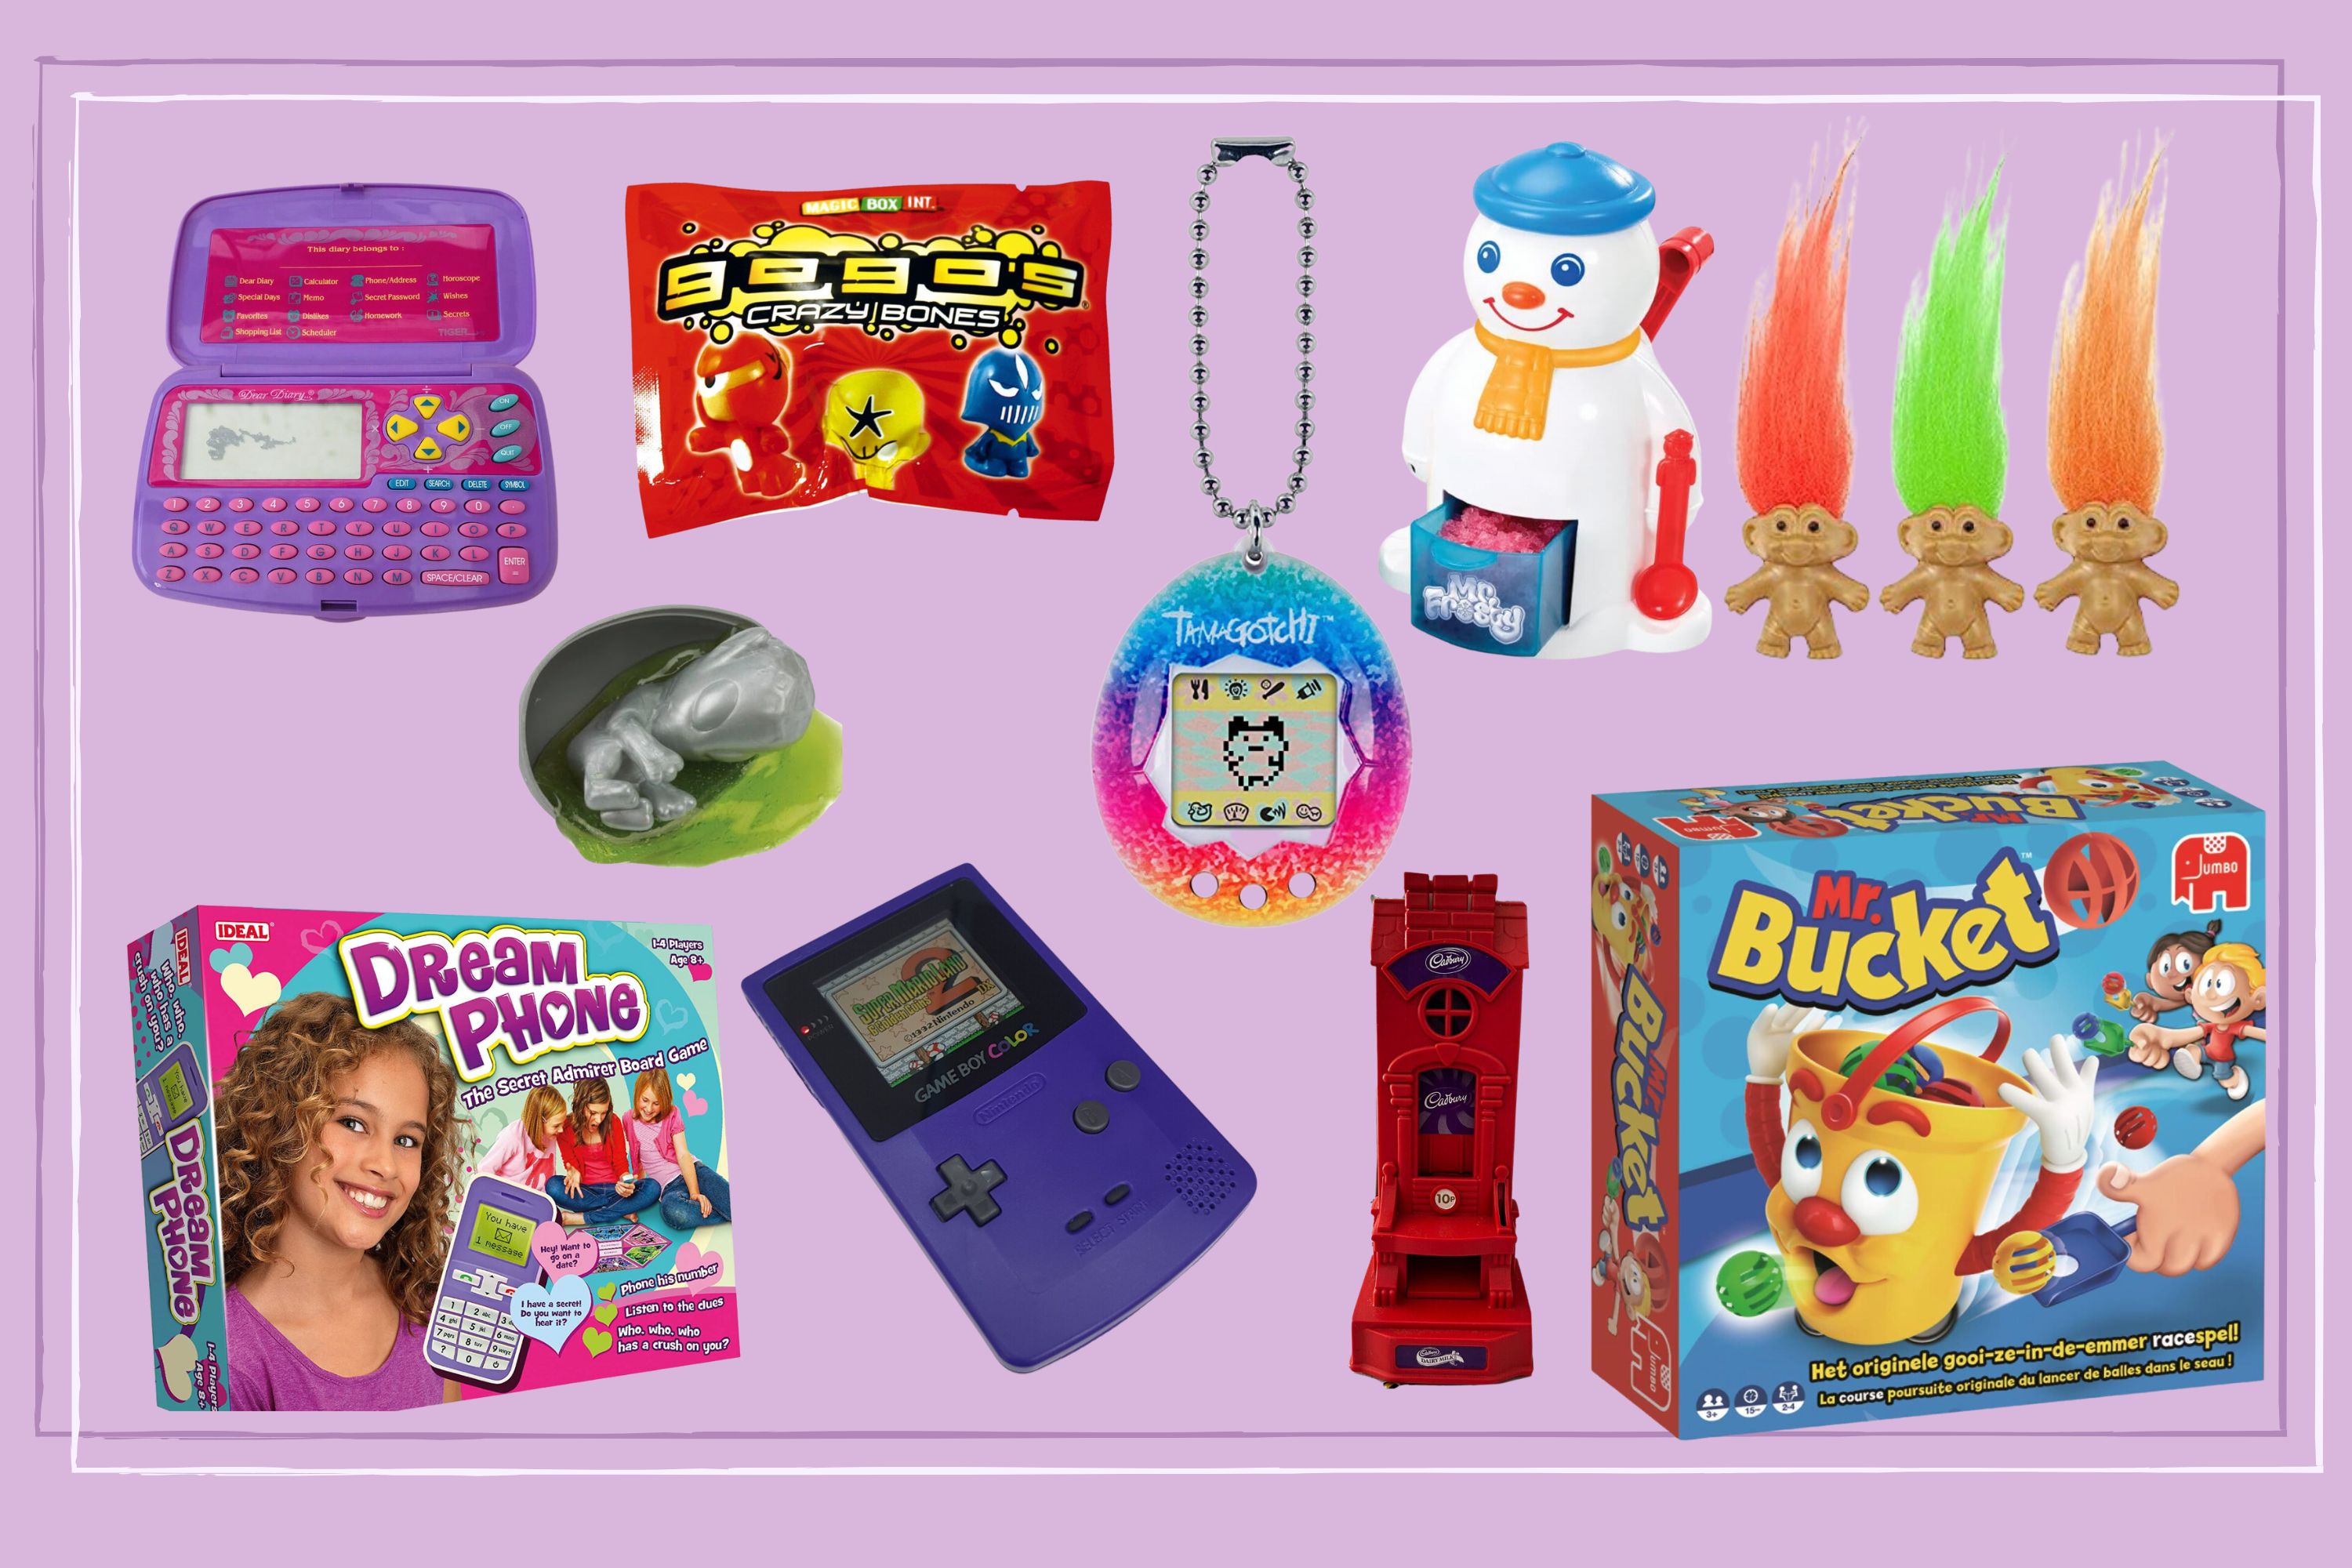 Magna Doodle - History's Best Toys: All-TIME 100 Greatest Toys - TIME